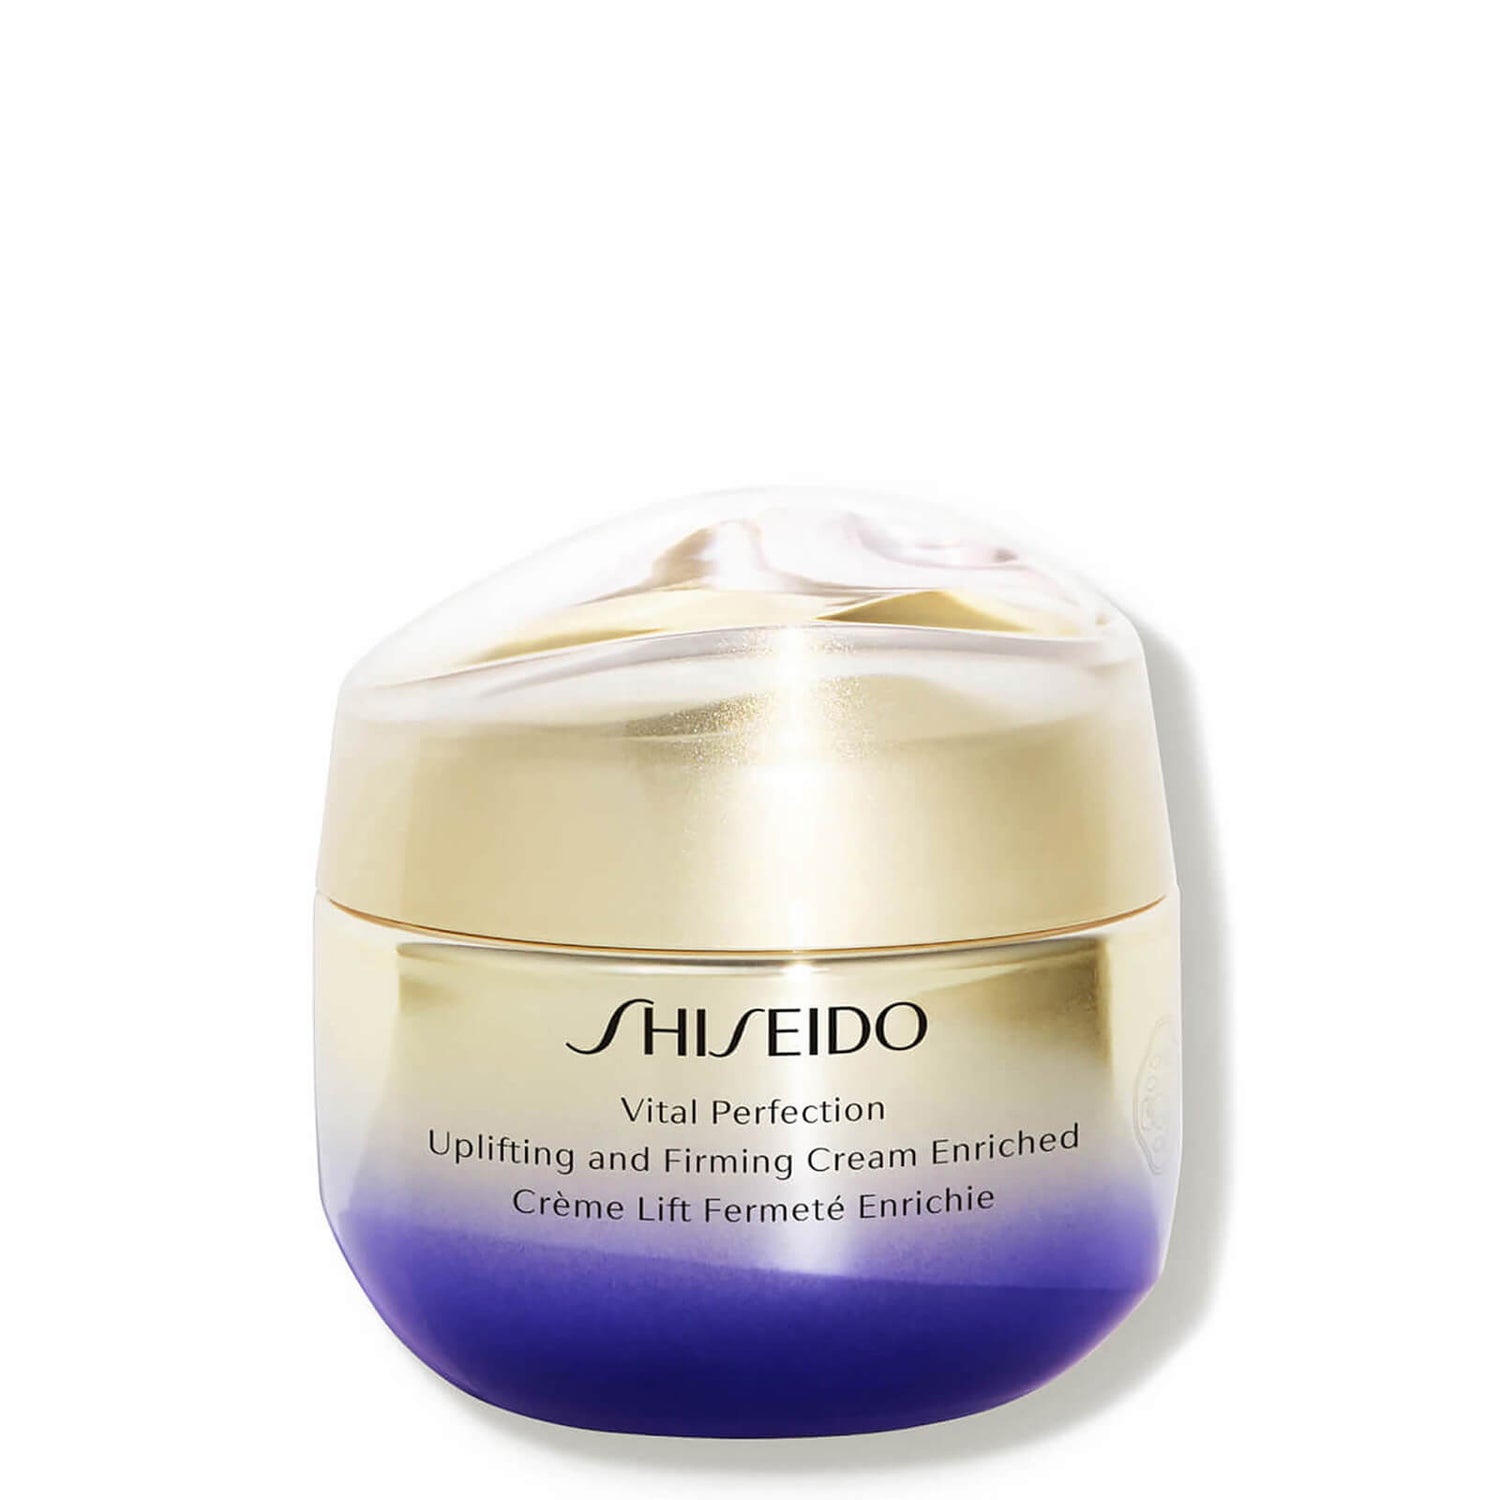 Shiseido Vital Perfection Uplifting and Firming Cream Enriched (50 ml.)